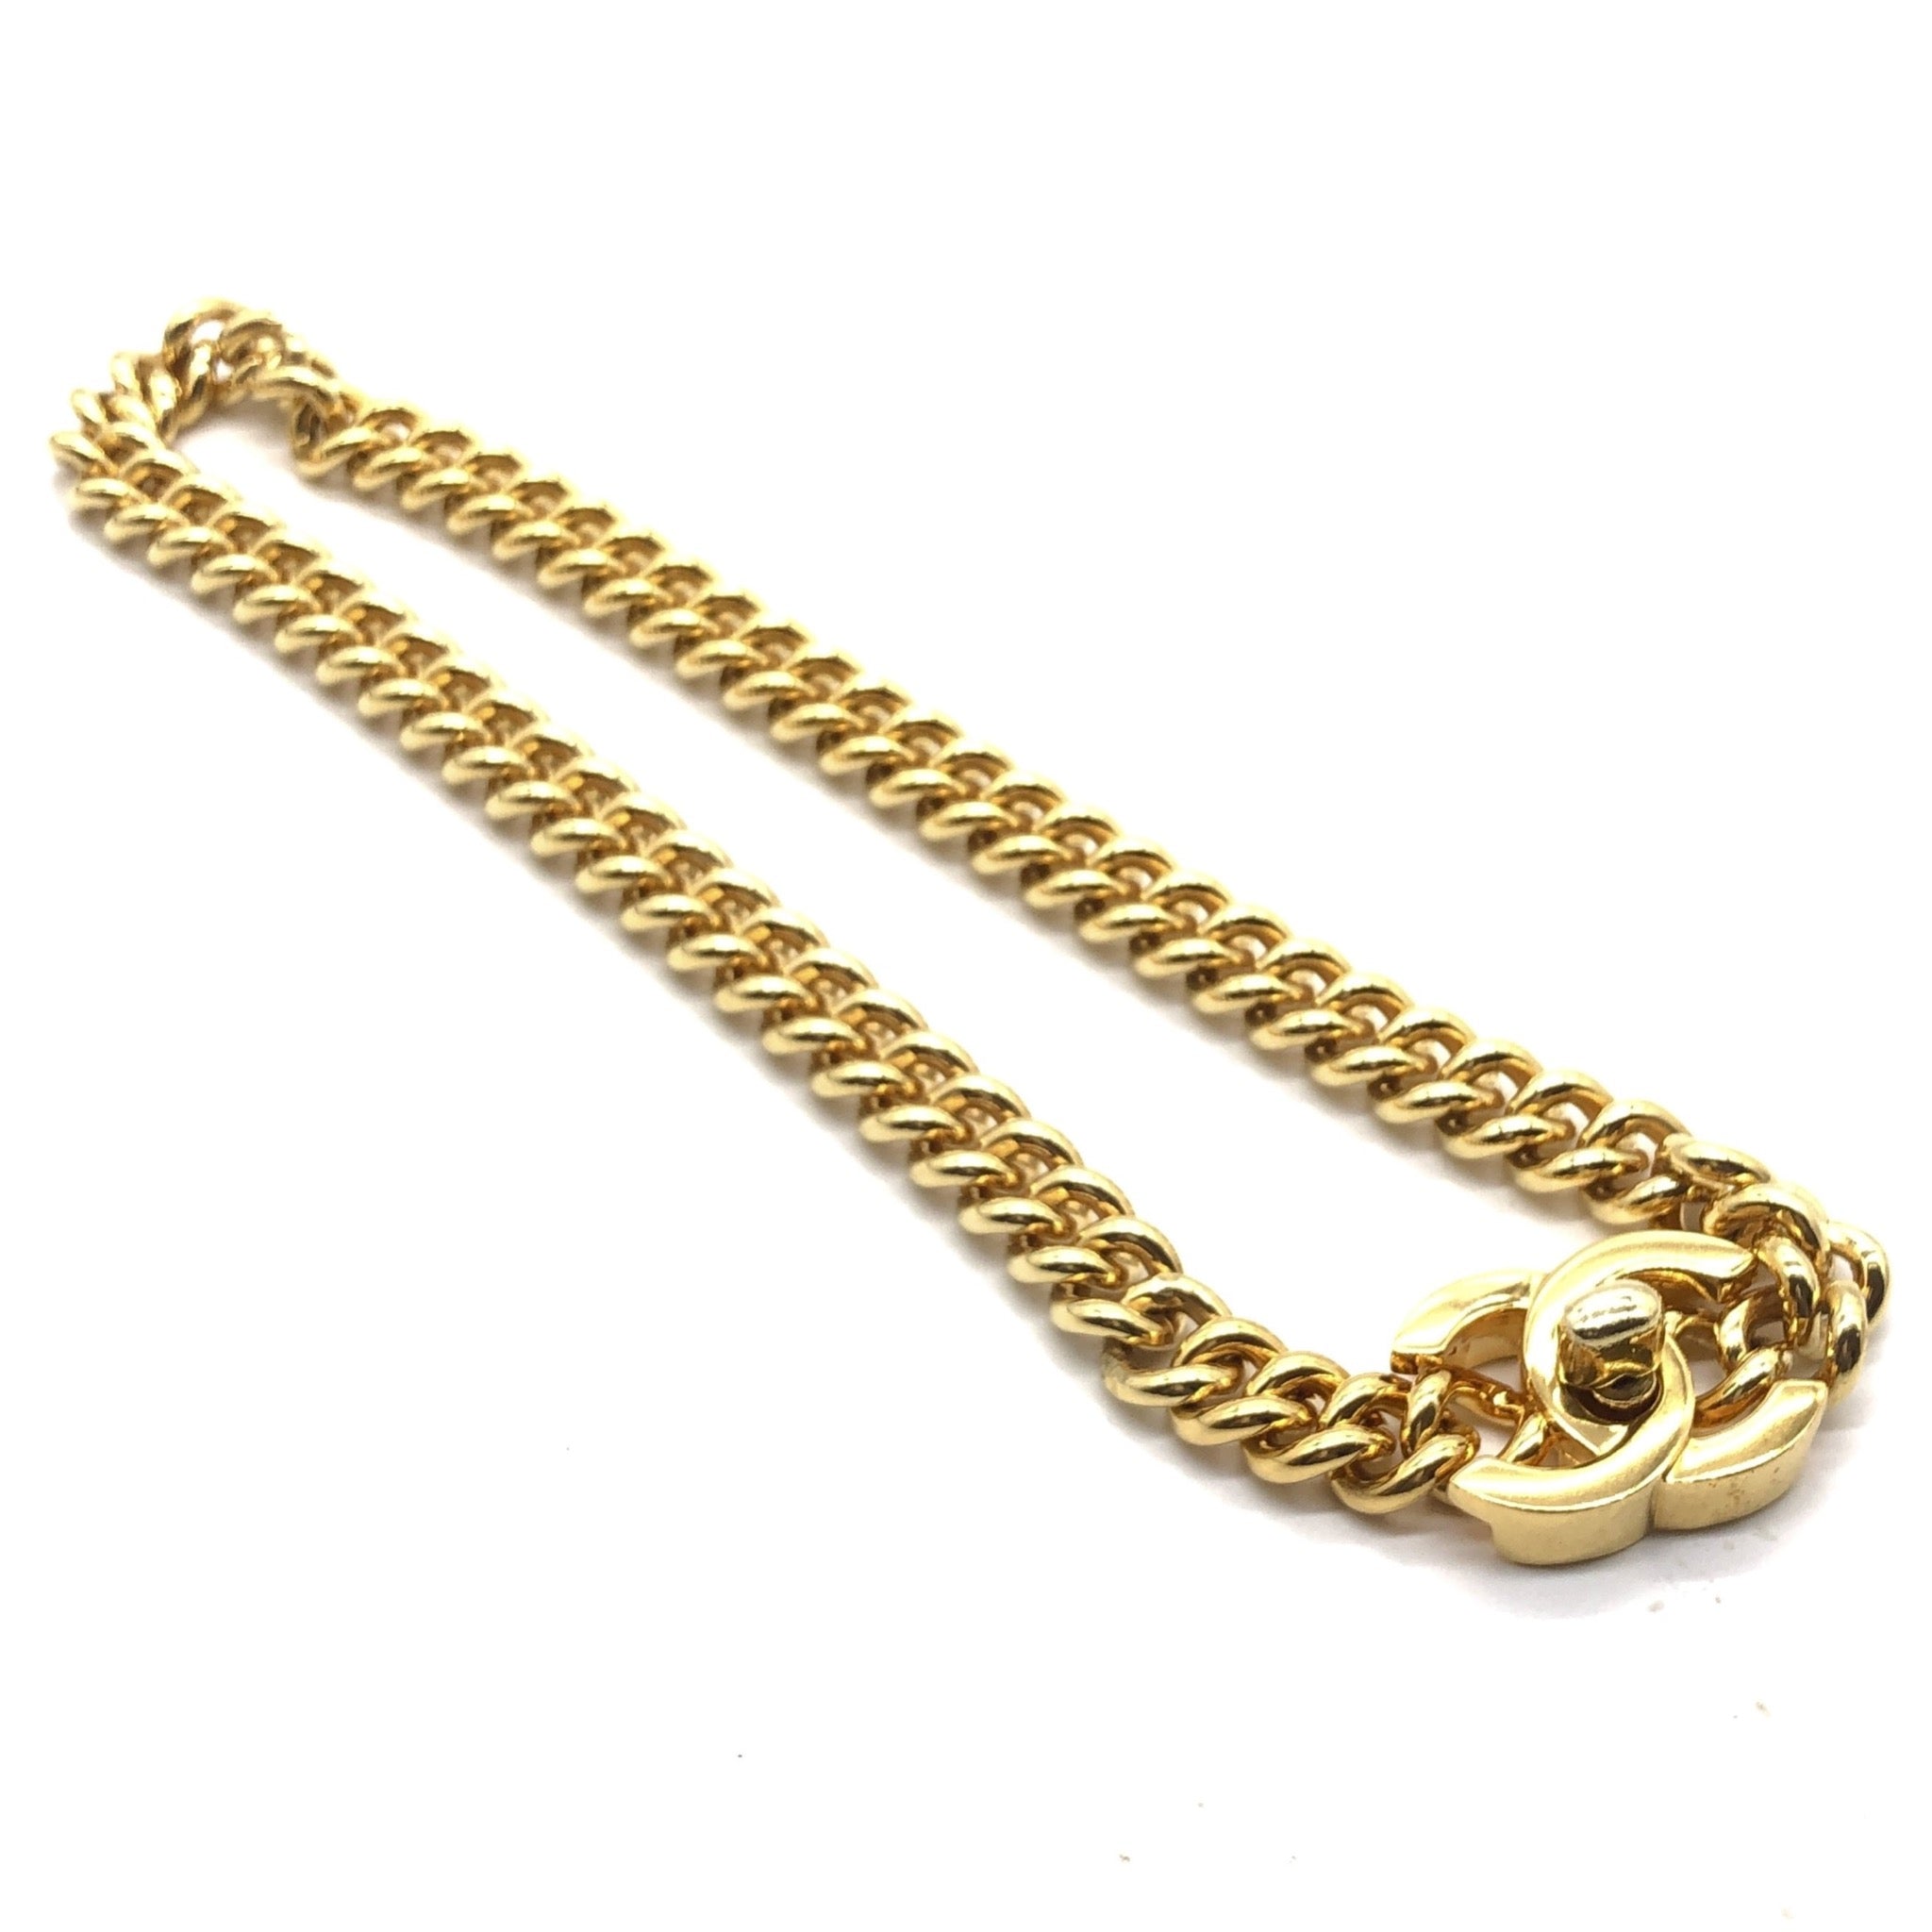 Chanel Vintage Gold Metal Chain CC Turnlock Choker Necklace, 1995